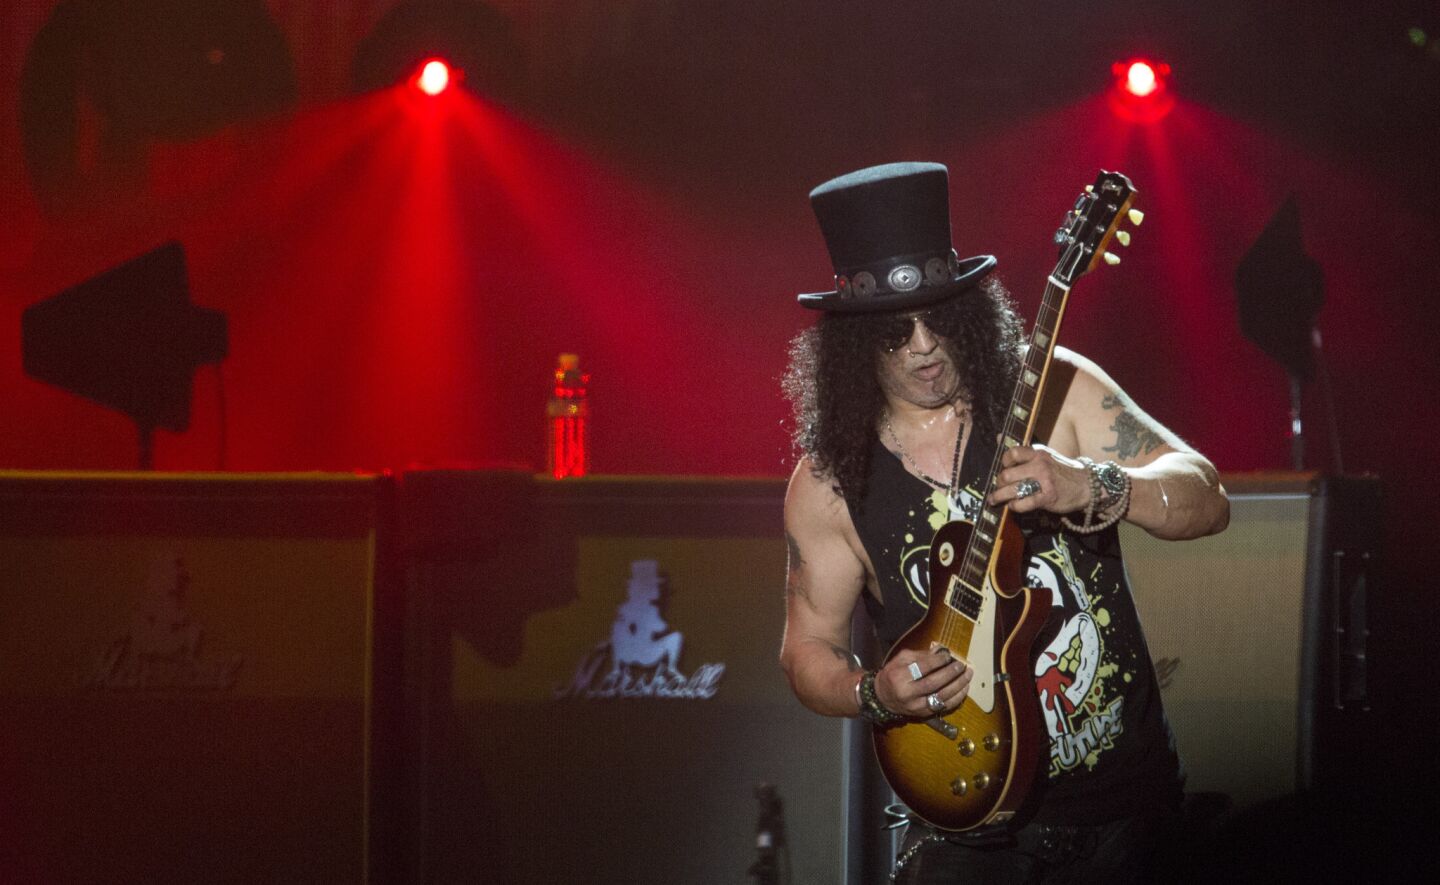 Guns N' Roses' Slash onstage at the Coachella Valley Music and Arts Festival.